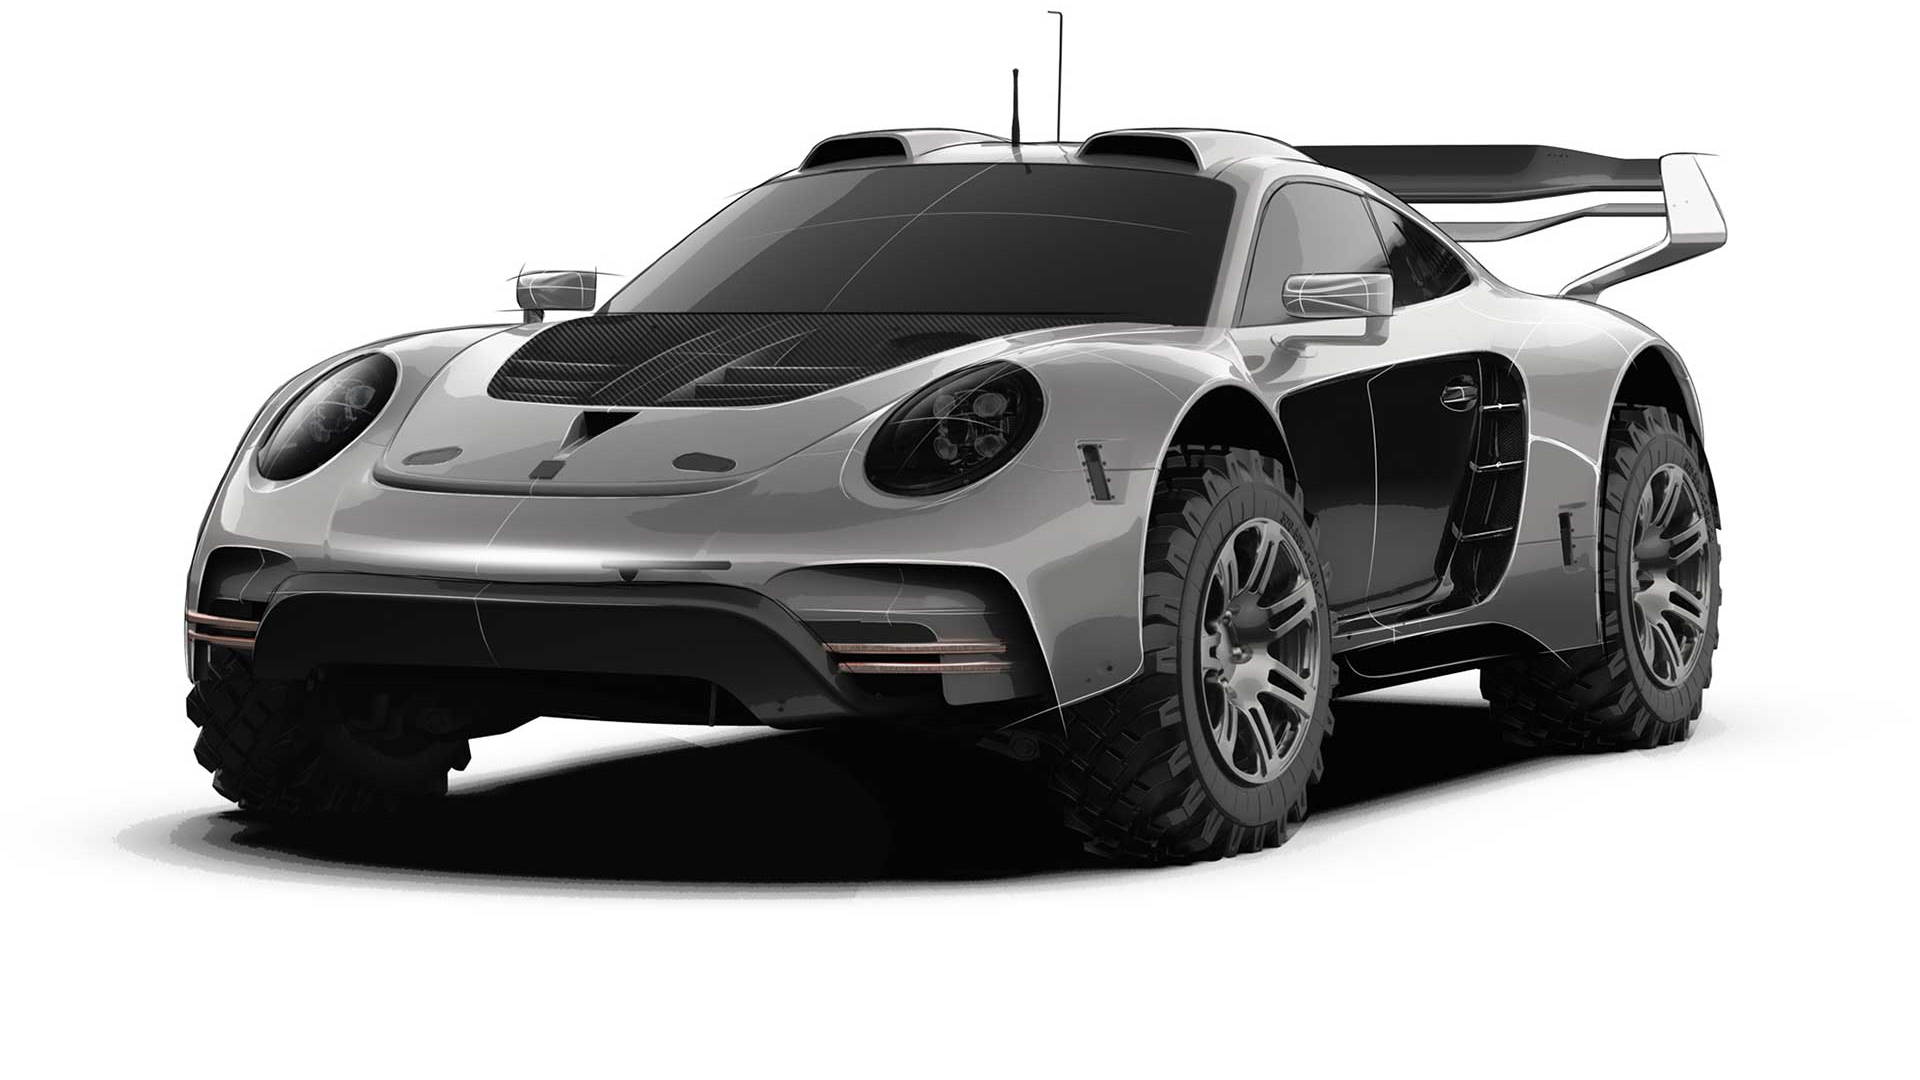 Teaser sketch for Gemballa Avalanche 4x4 based on the 991-generation Porsche 911